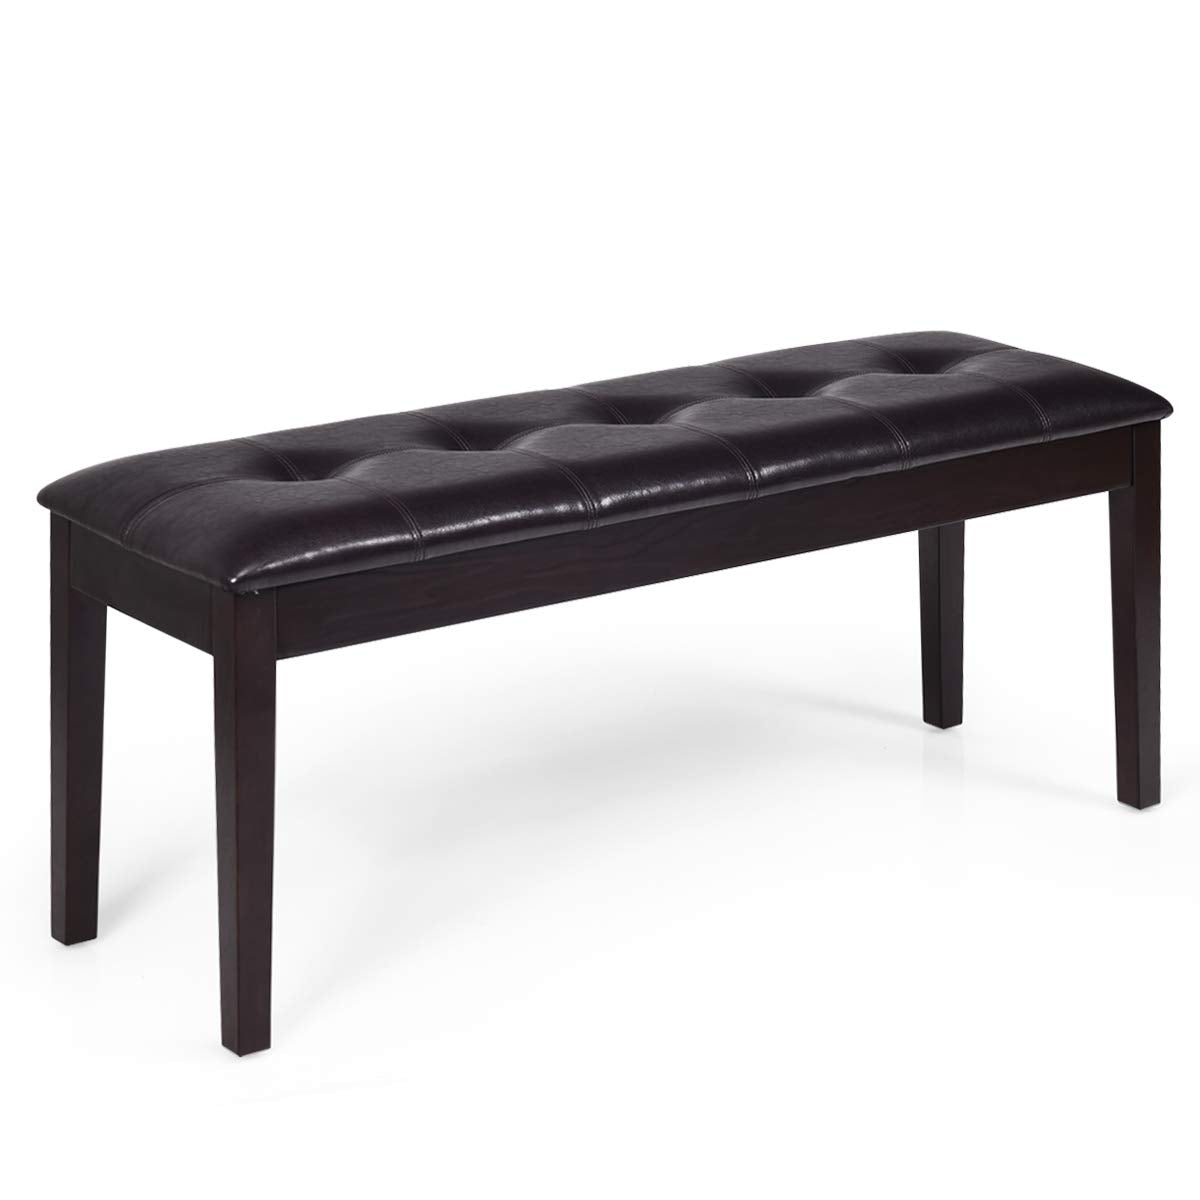 Giantex Dining Room Bench, Traditional Upholstered Table Benches